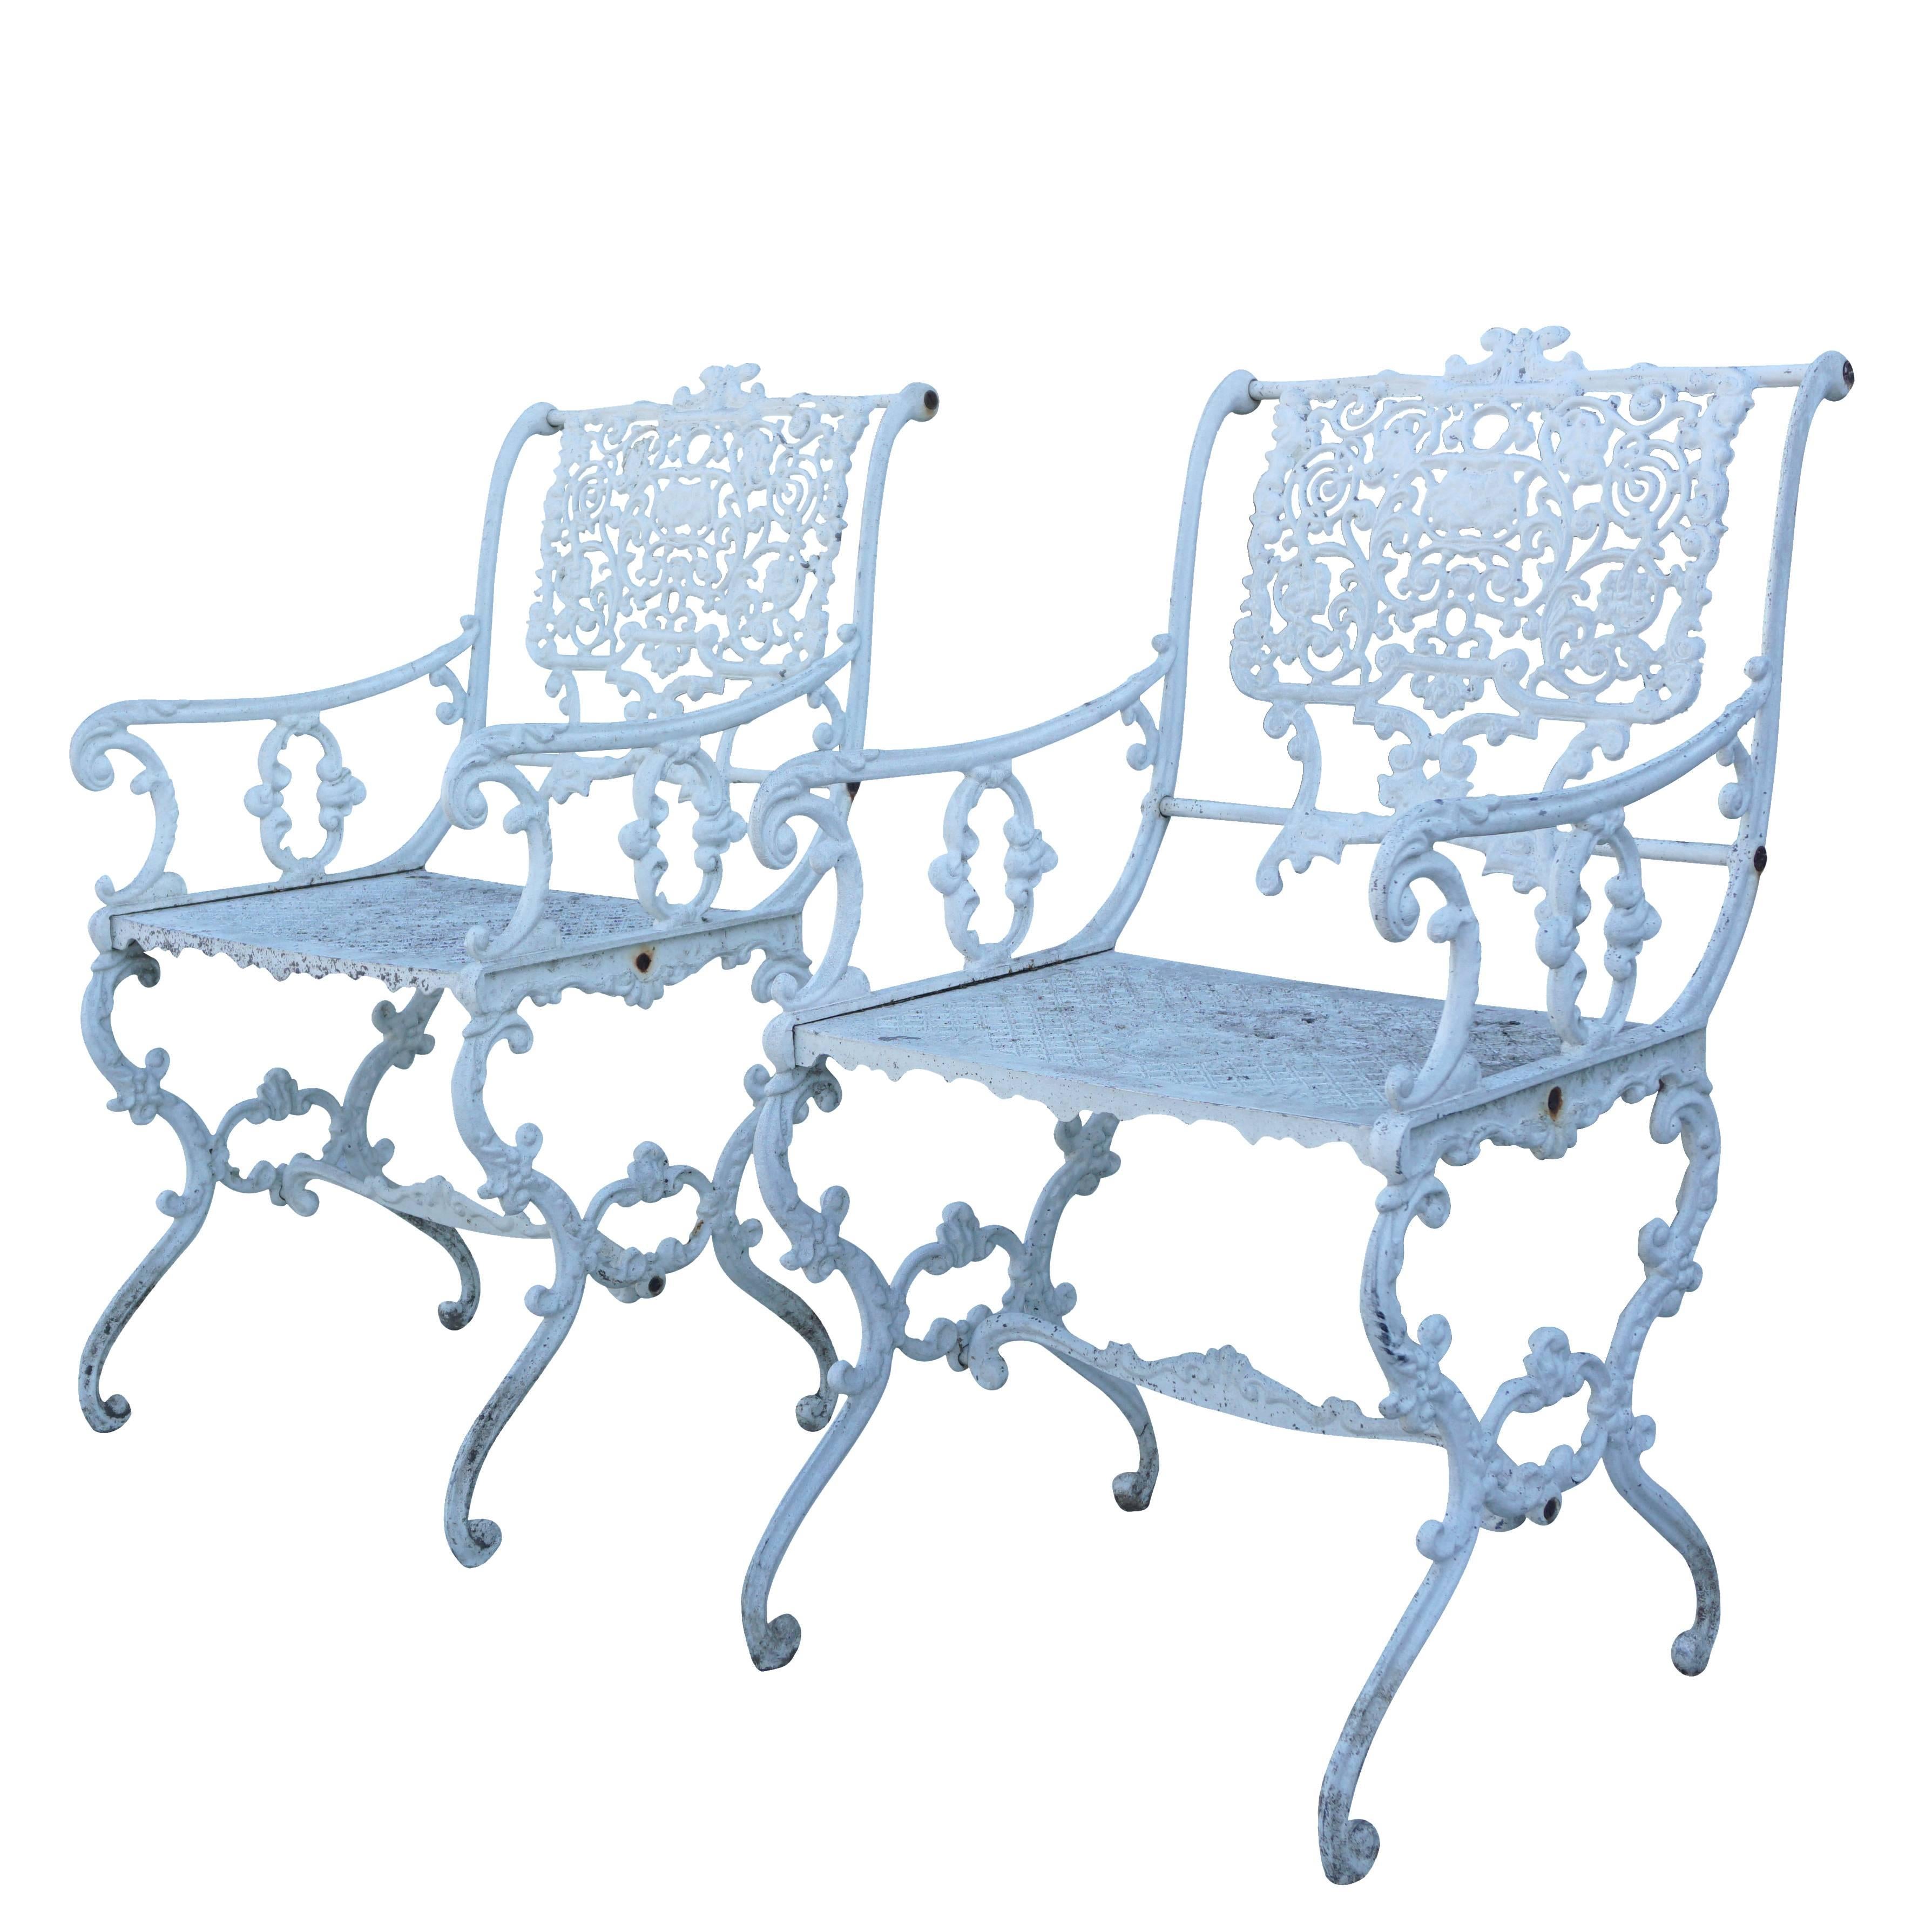 A pair of beautifully 19th century Victorian style cast iron garden fauteuils with armrests finished in a white oil based finish, circa 1860, England. Measures: Seat height 17